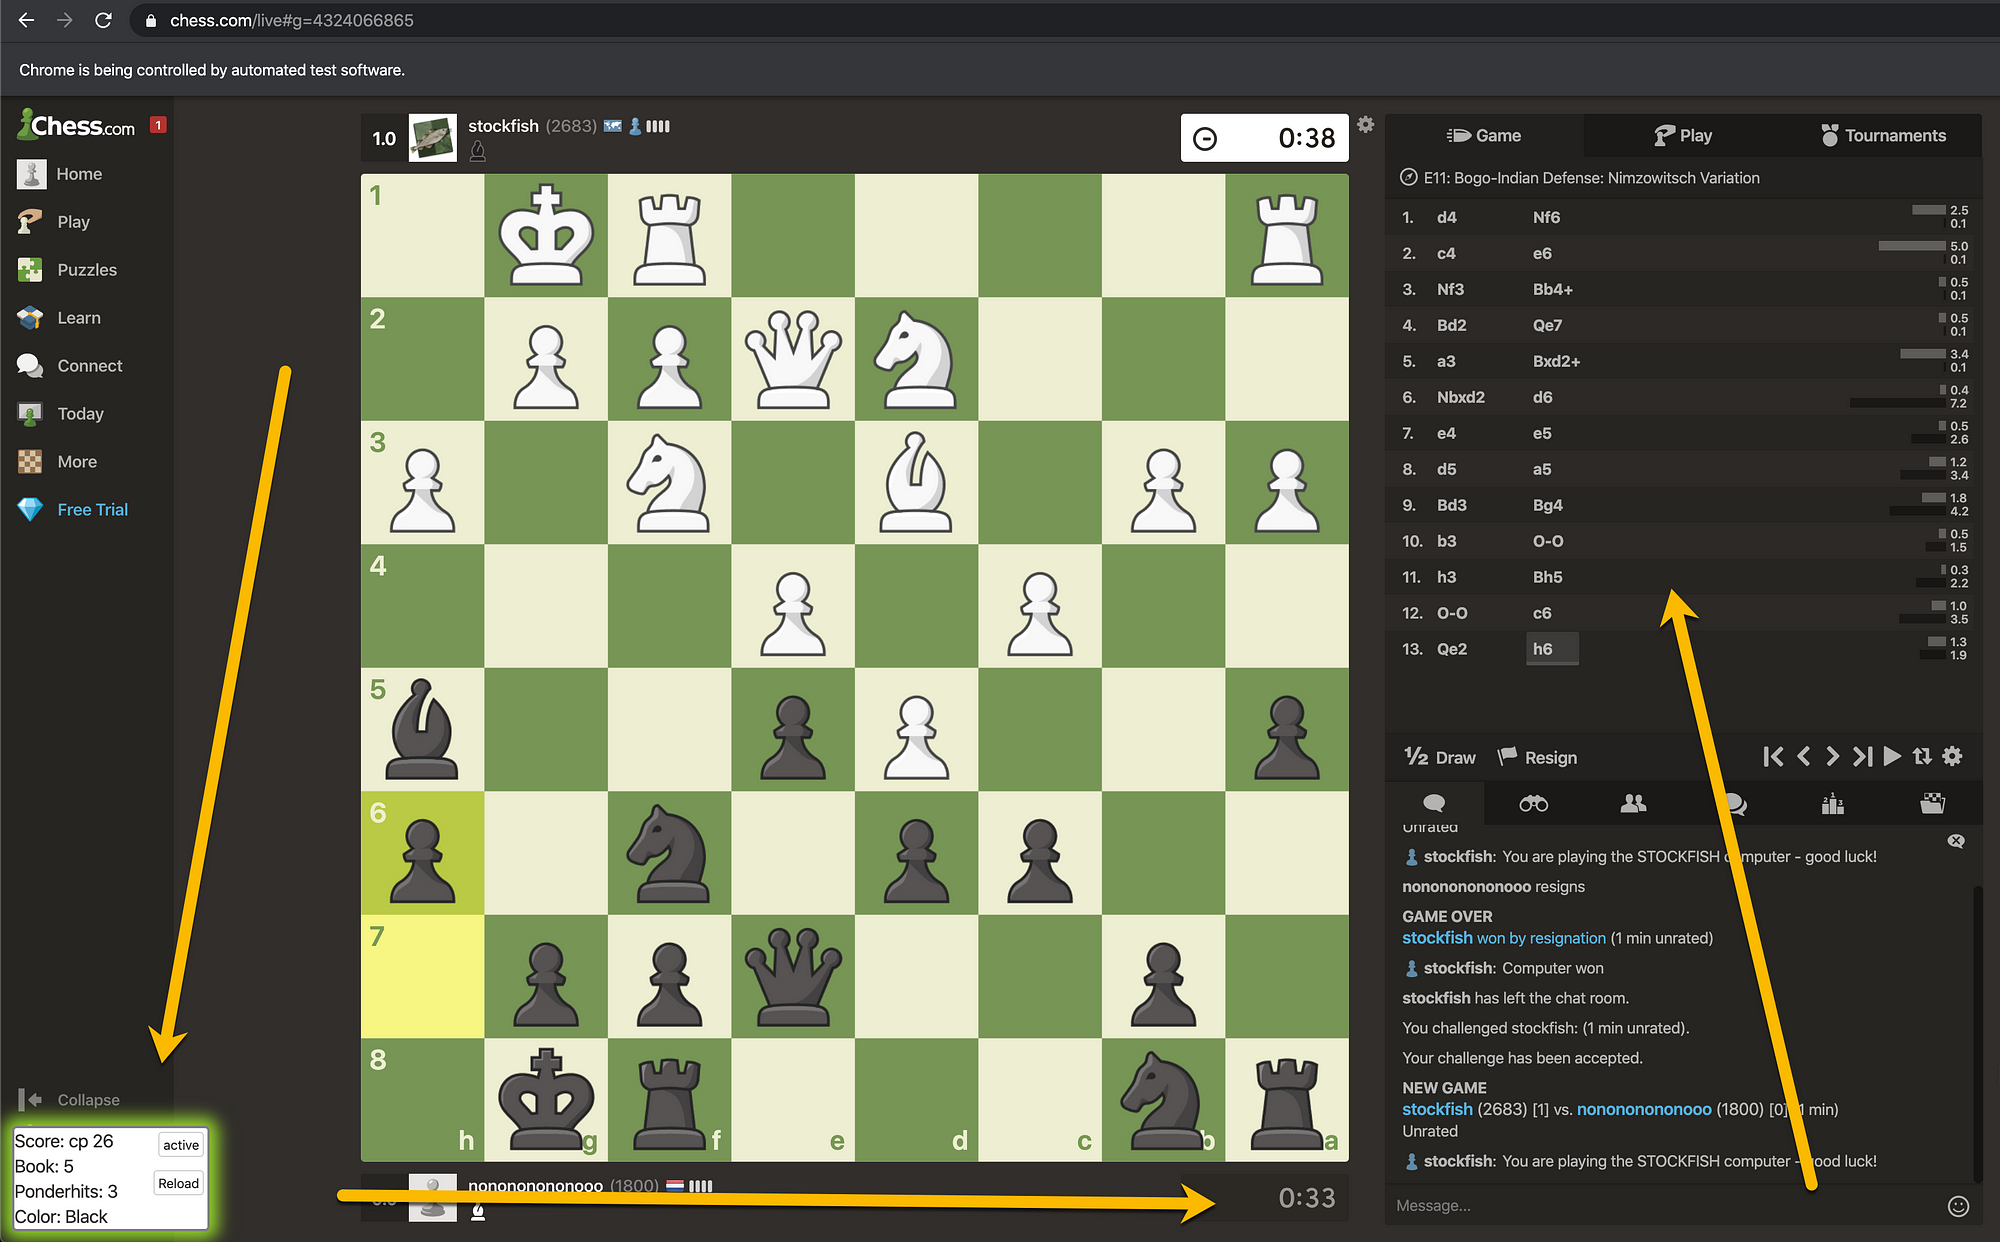 How to Cheat on Chess.com